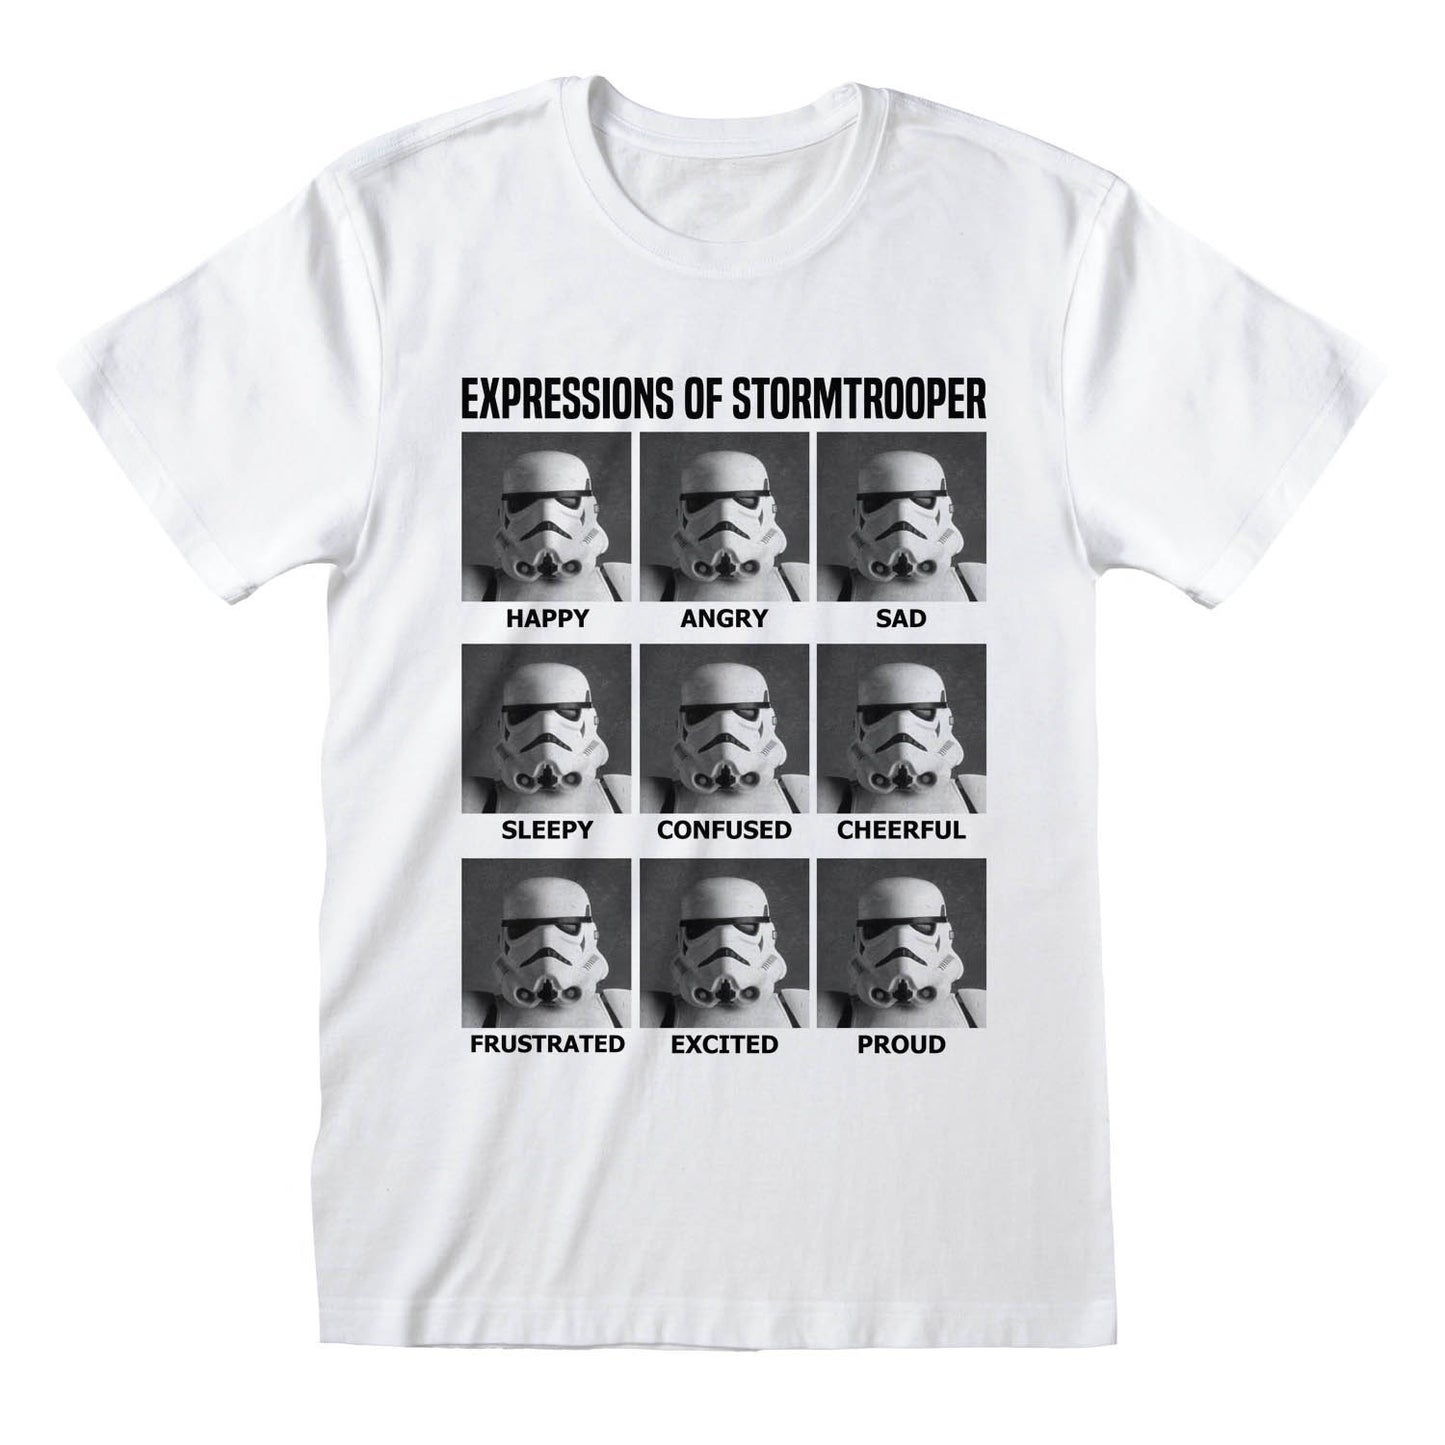 STAR WARS - Expressions Of A Stormtrooper T-Shirt